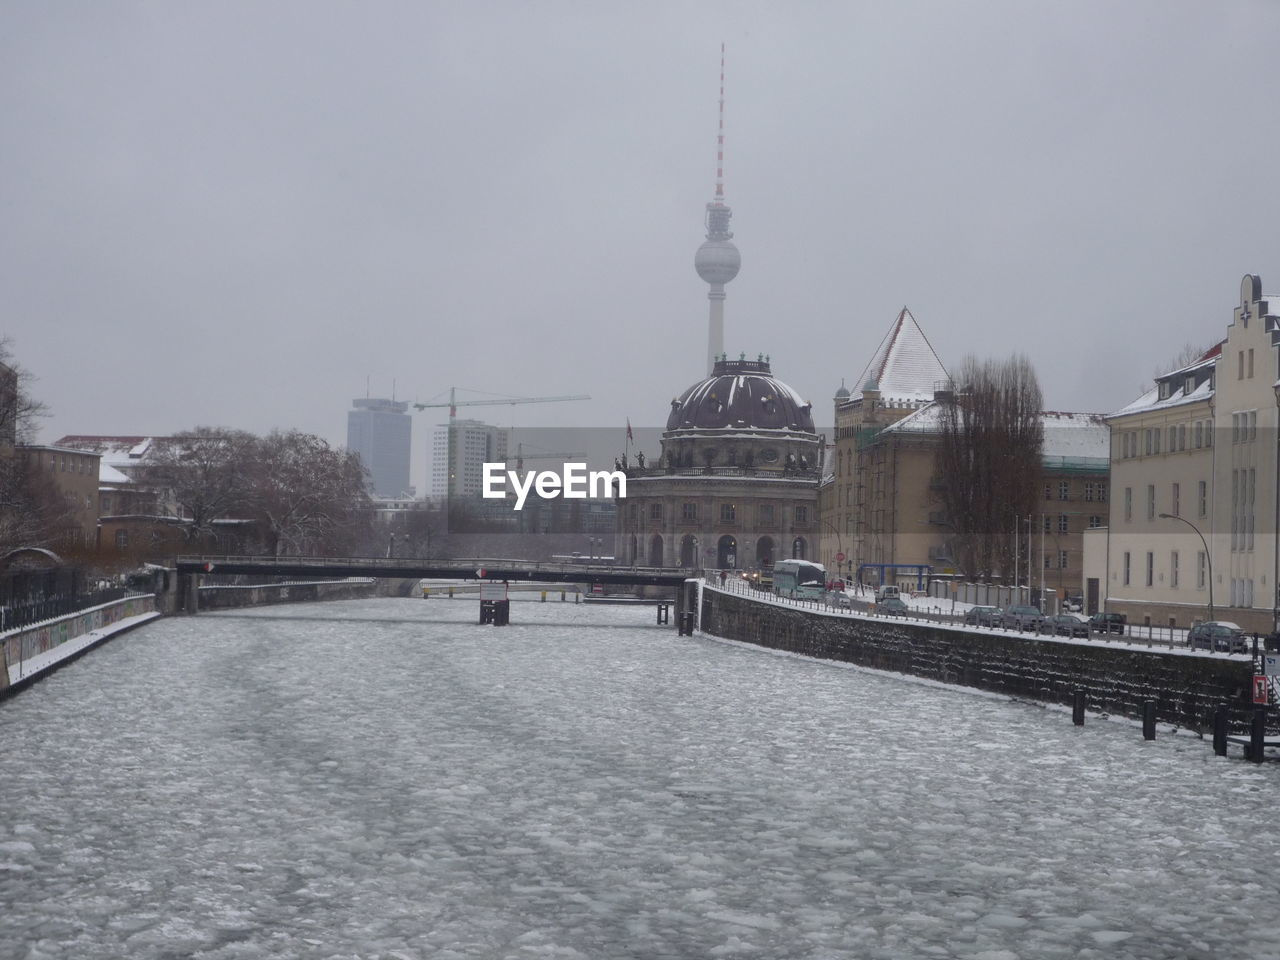 VIEW OF CITY IN WINTER